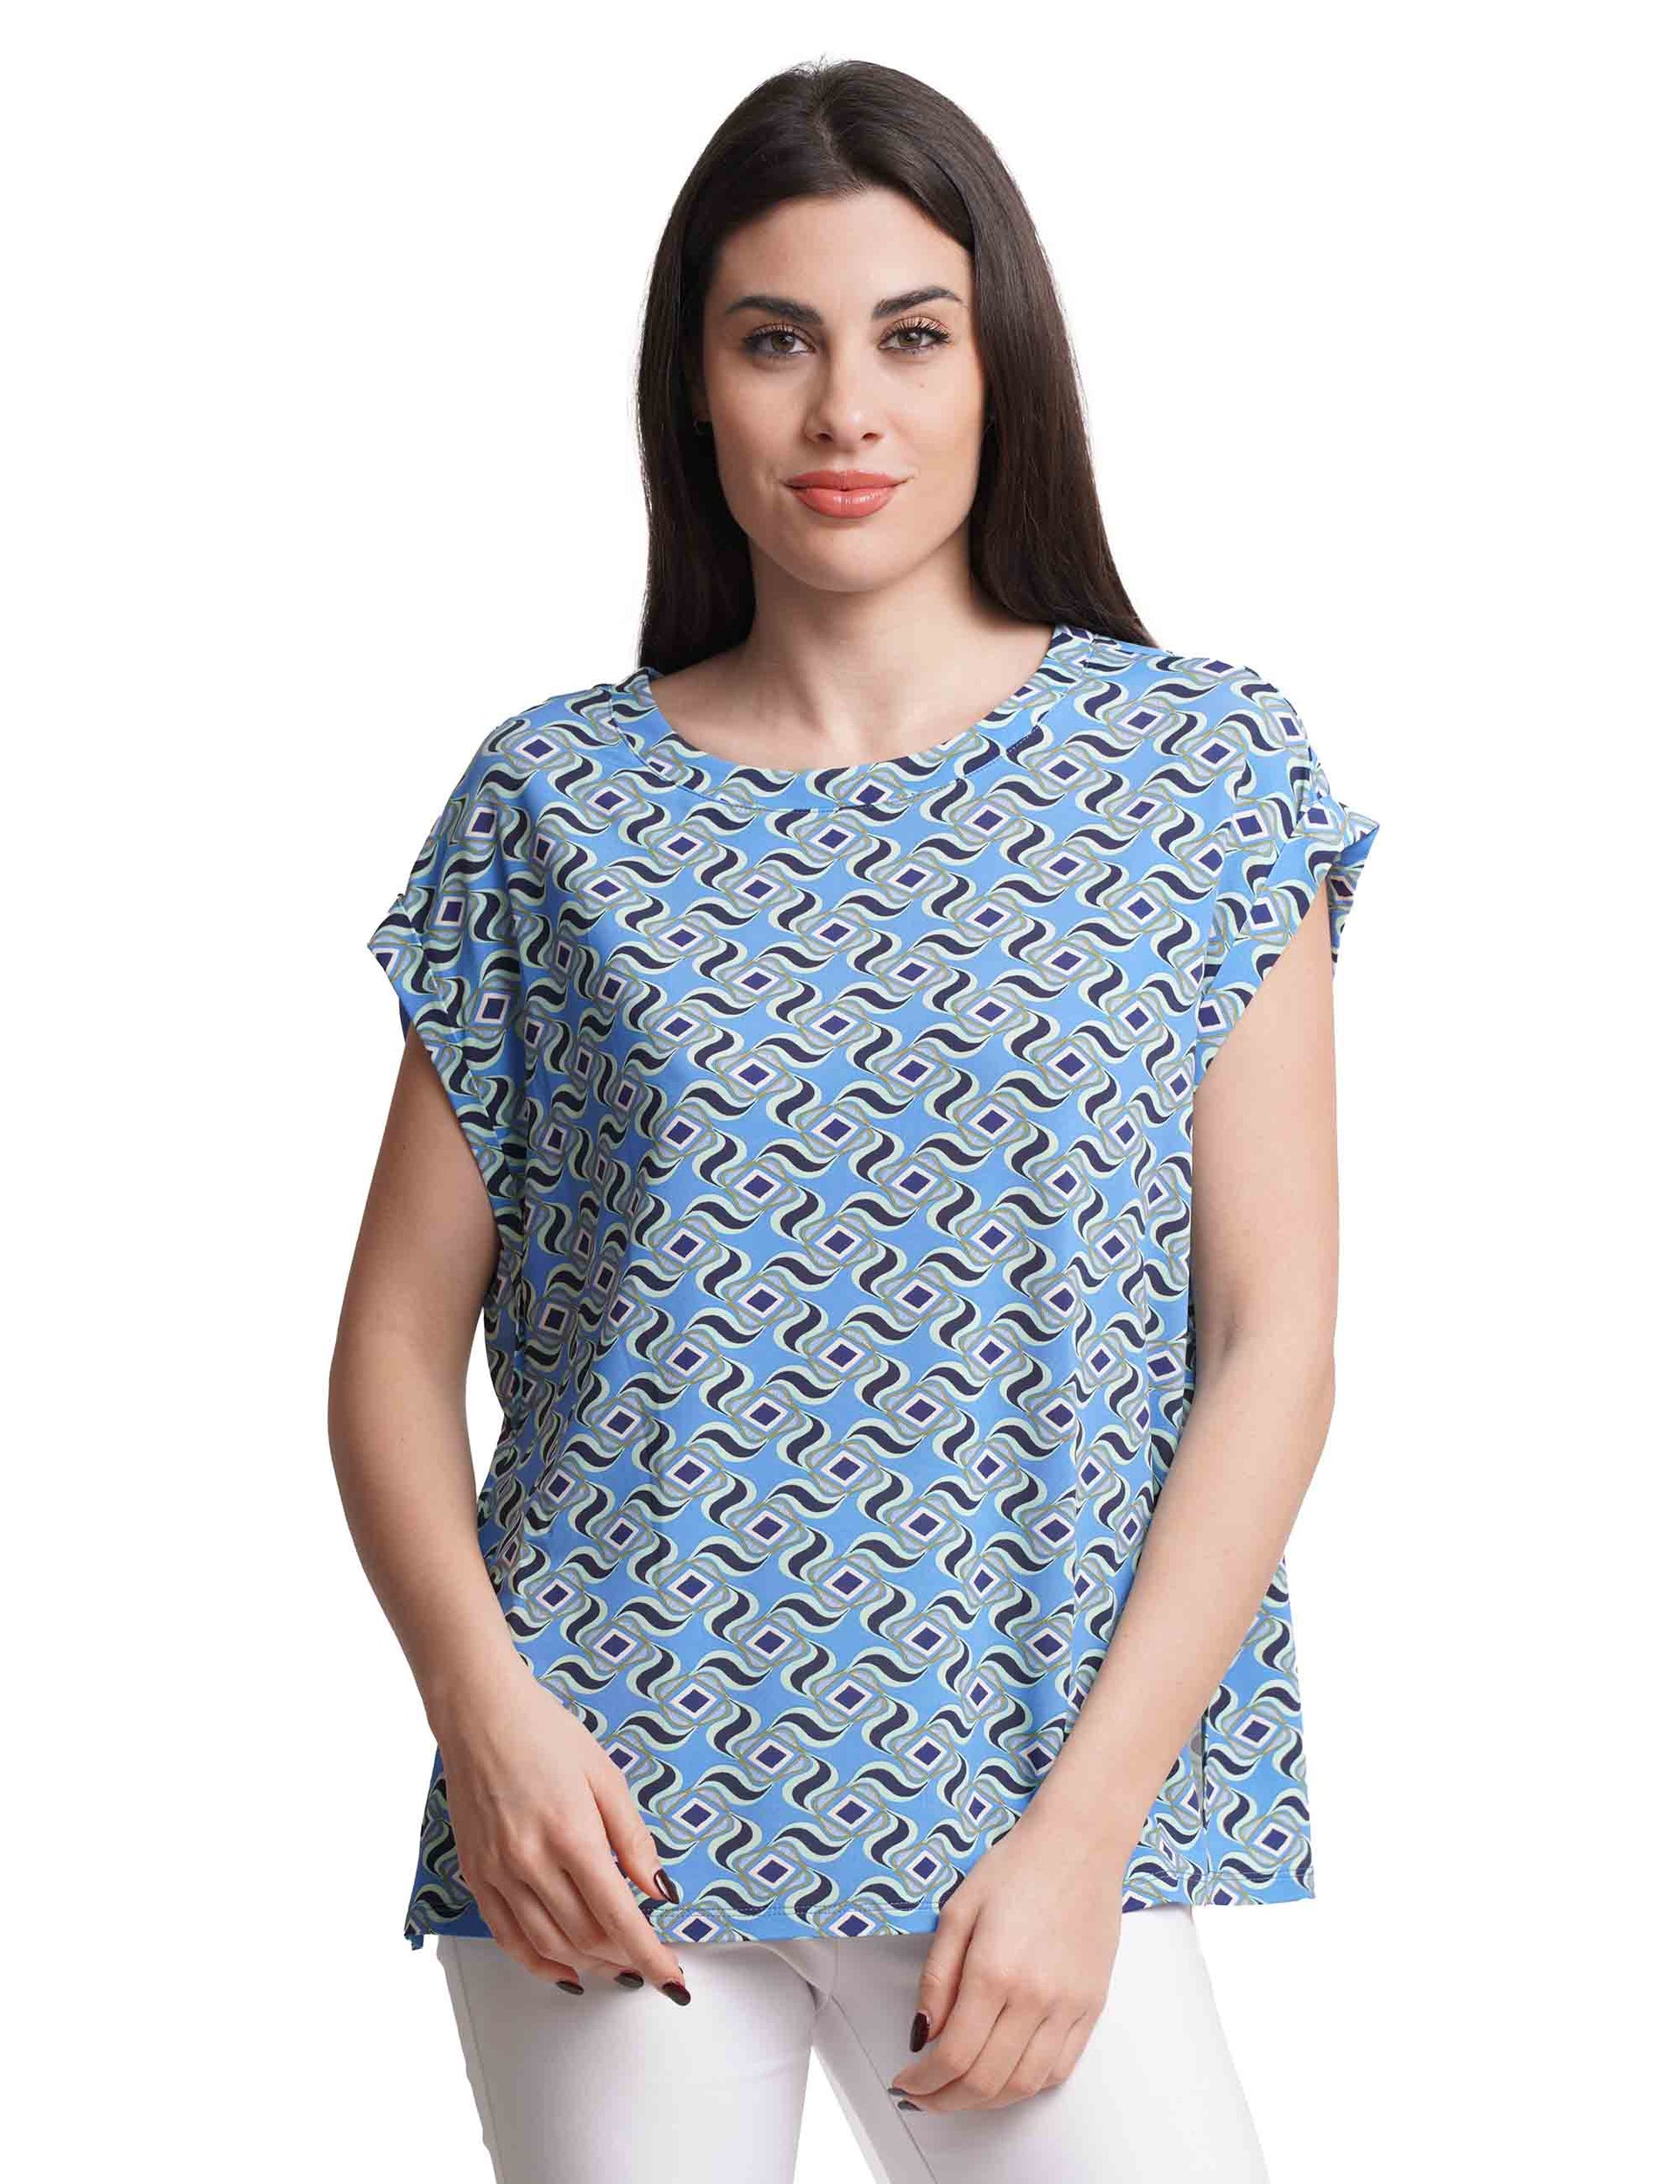 Swirl Print women's t-shirt in patterned light blue jersey with cap sleeves